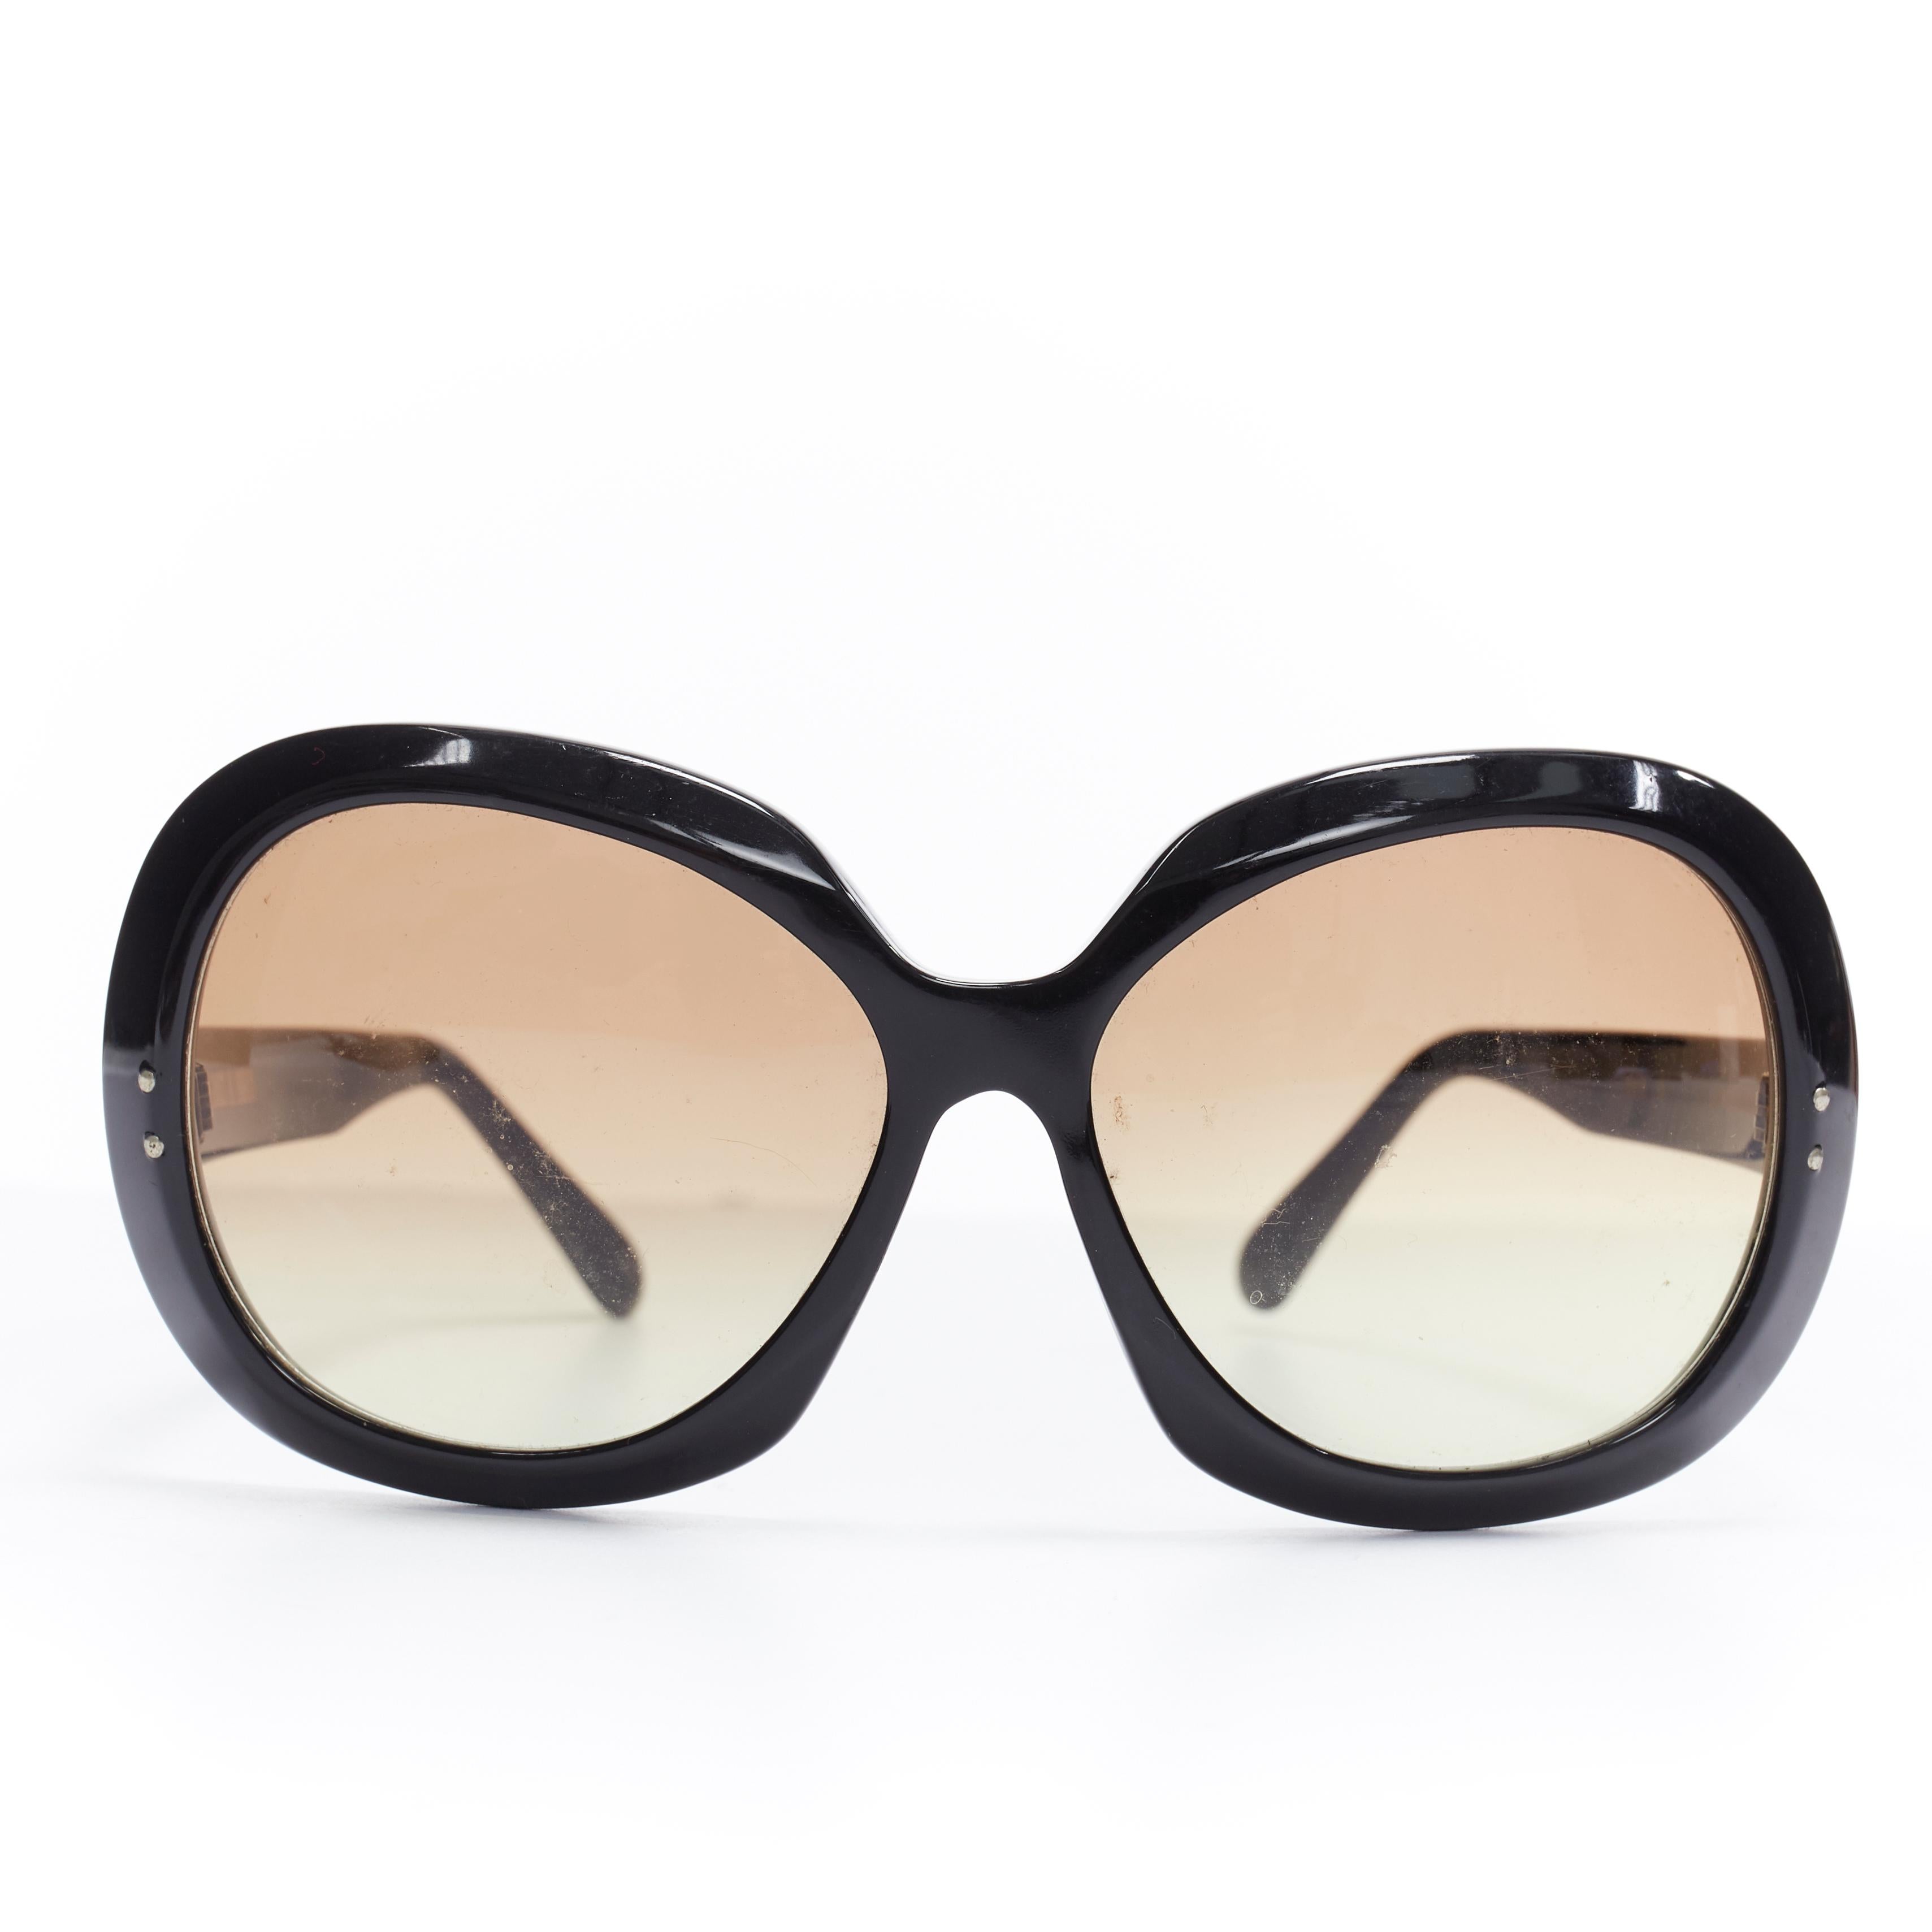 CUTLER GROSS black oversized frame brown gradient lens butterfly sunglasses Reference: WEYN/A00347 
Brand: Cutler & Gross 
Material: Plastic 
Color: Black 
Pattern: Solid 
Extra Detail: Hand Made. 
Made in: London 

CONDITION: 
Condition: Very good,